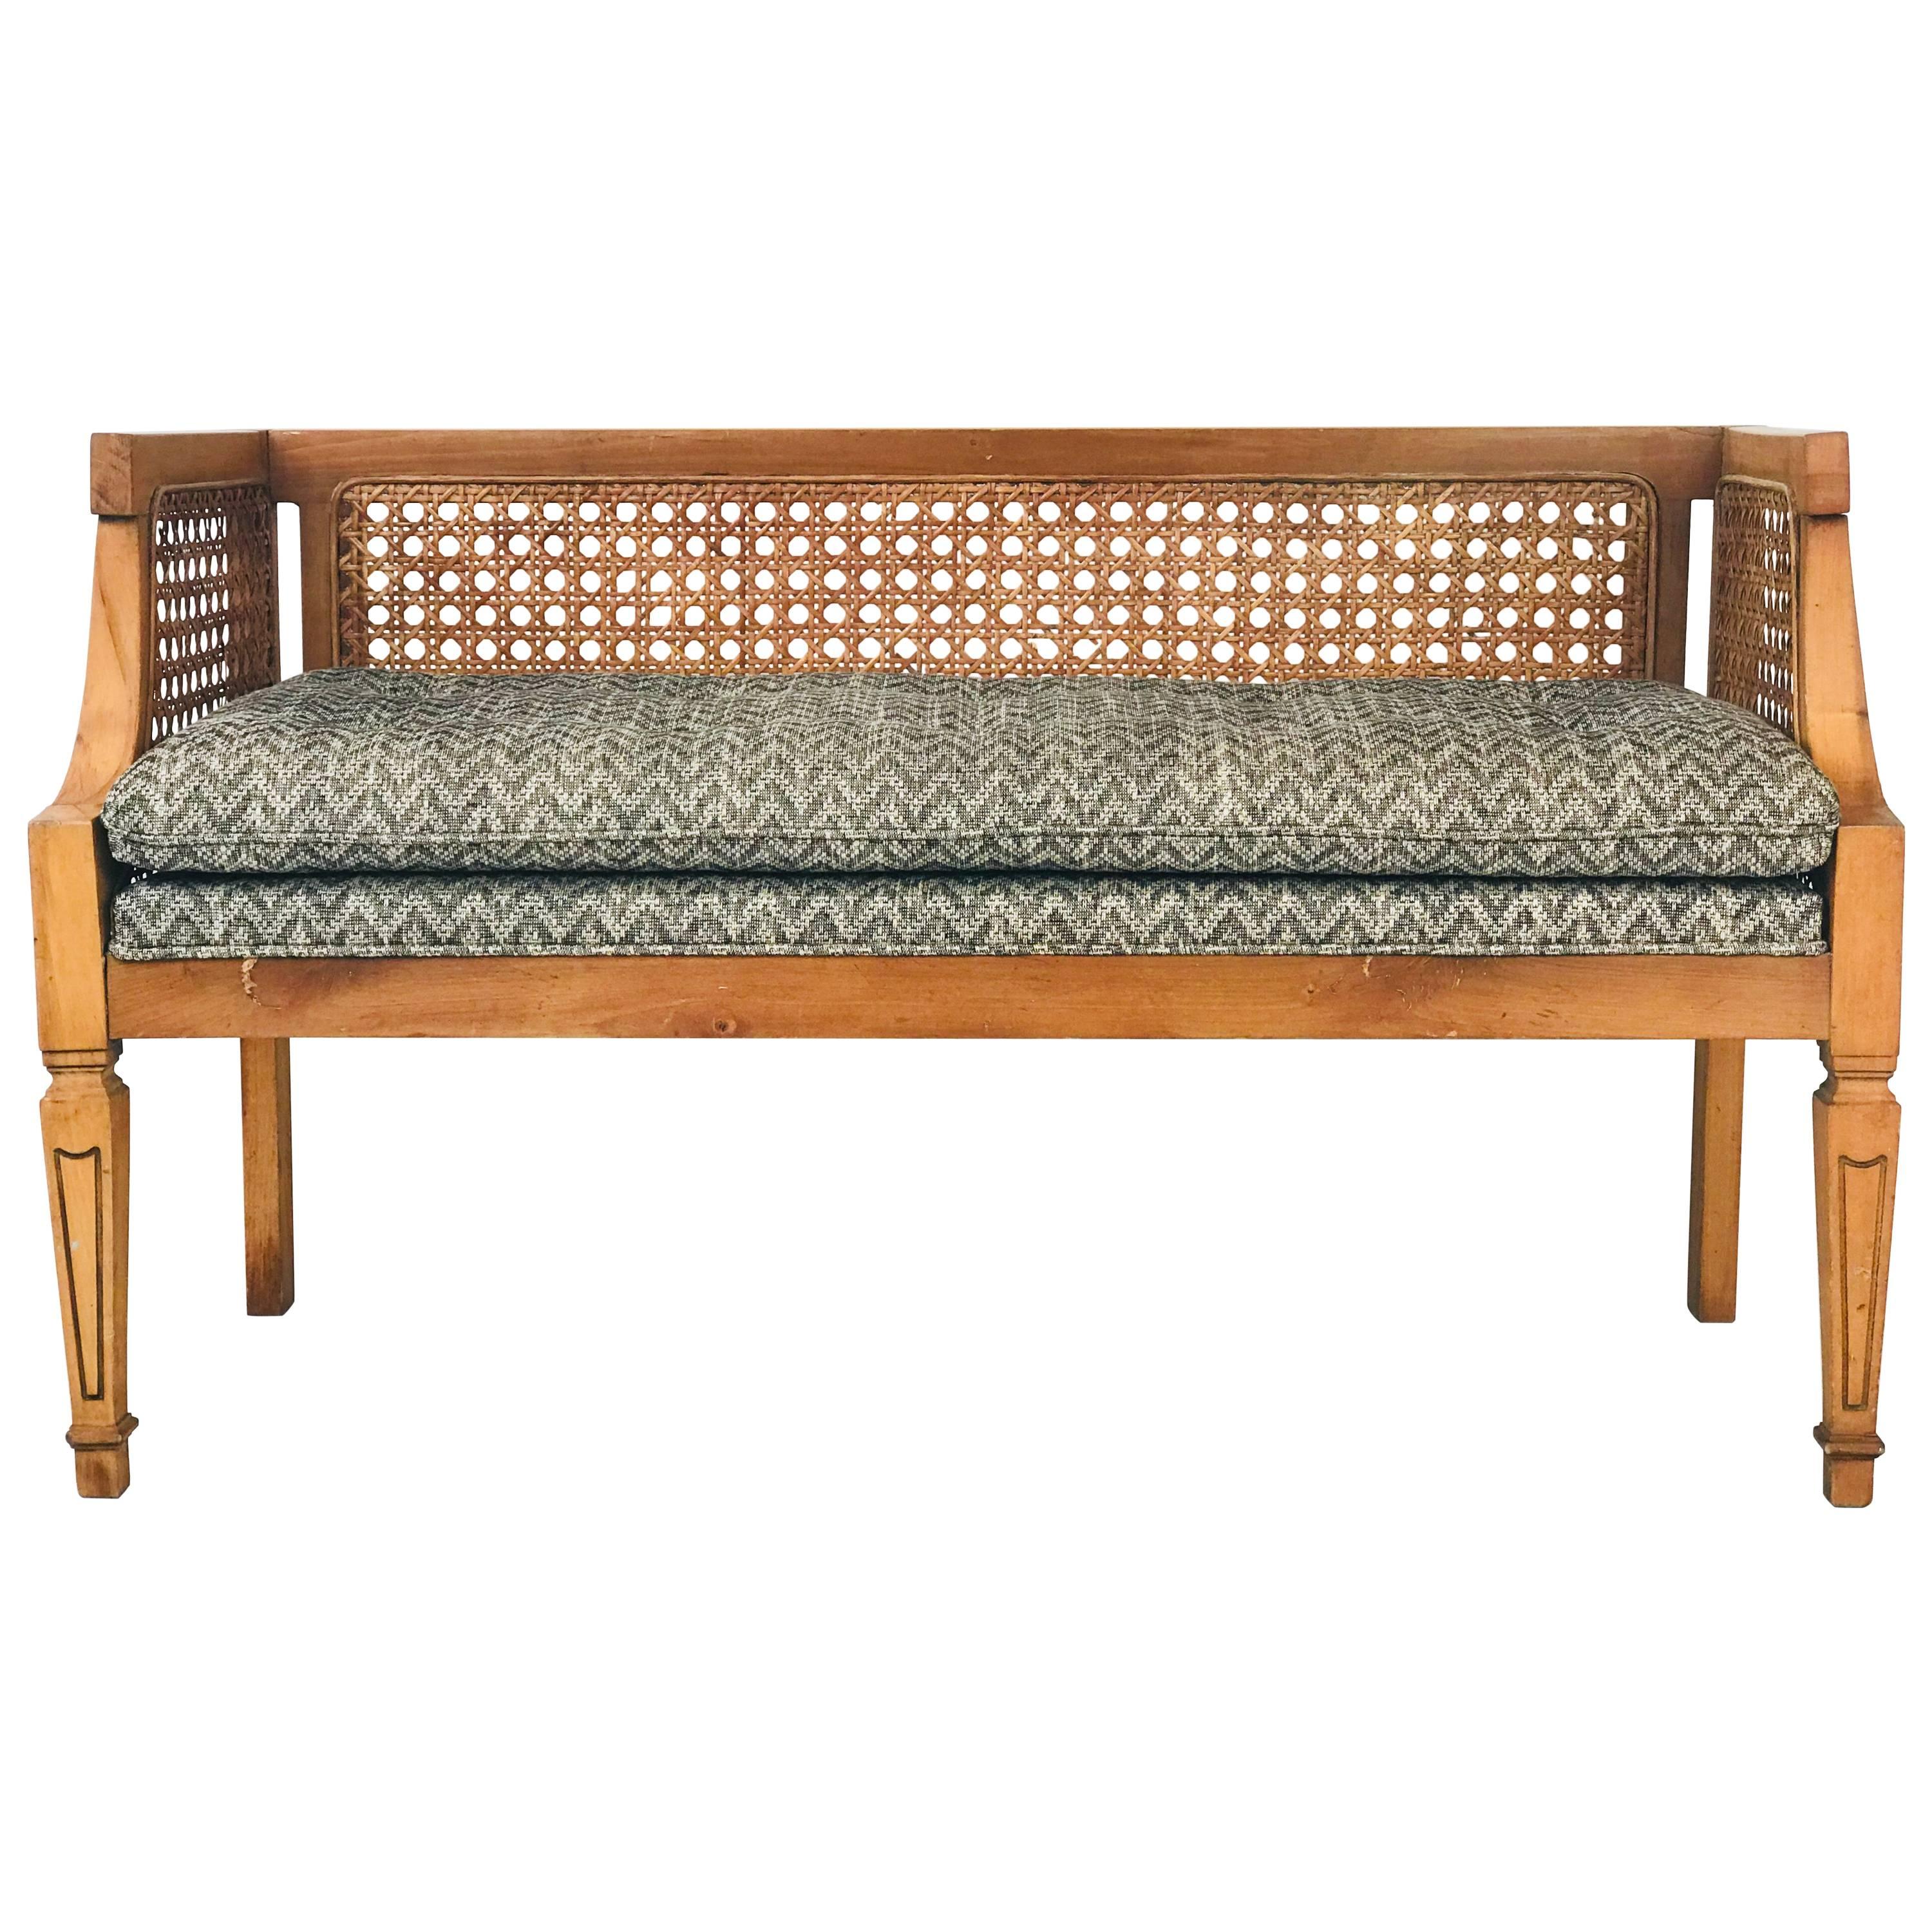 Midcentury Cane Bench with Newly Upholstered Seat